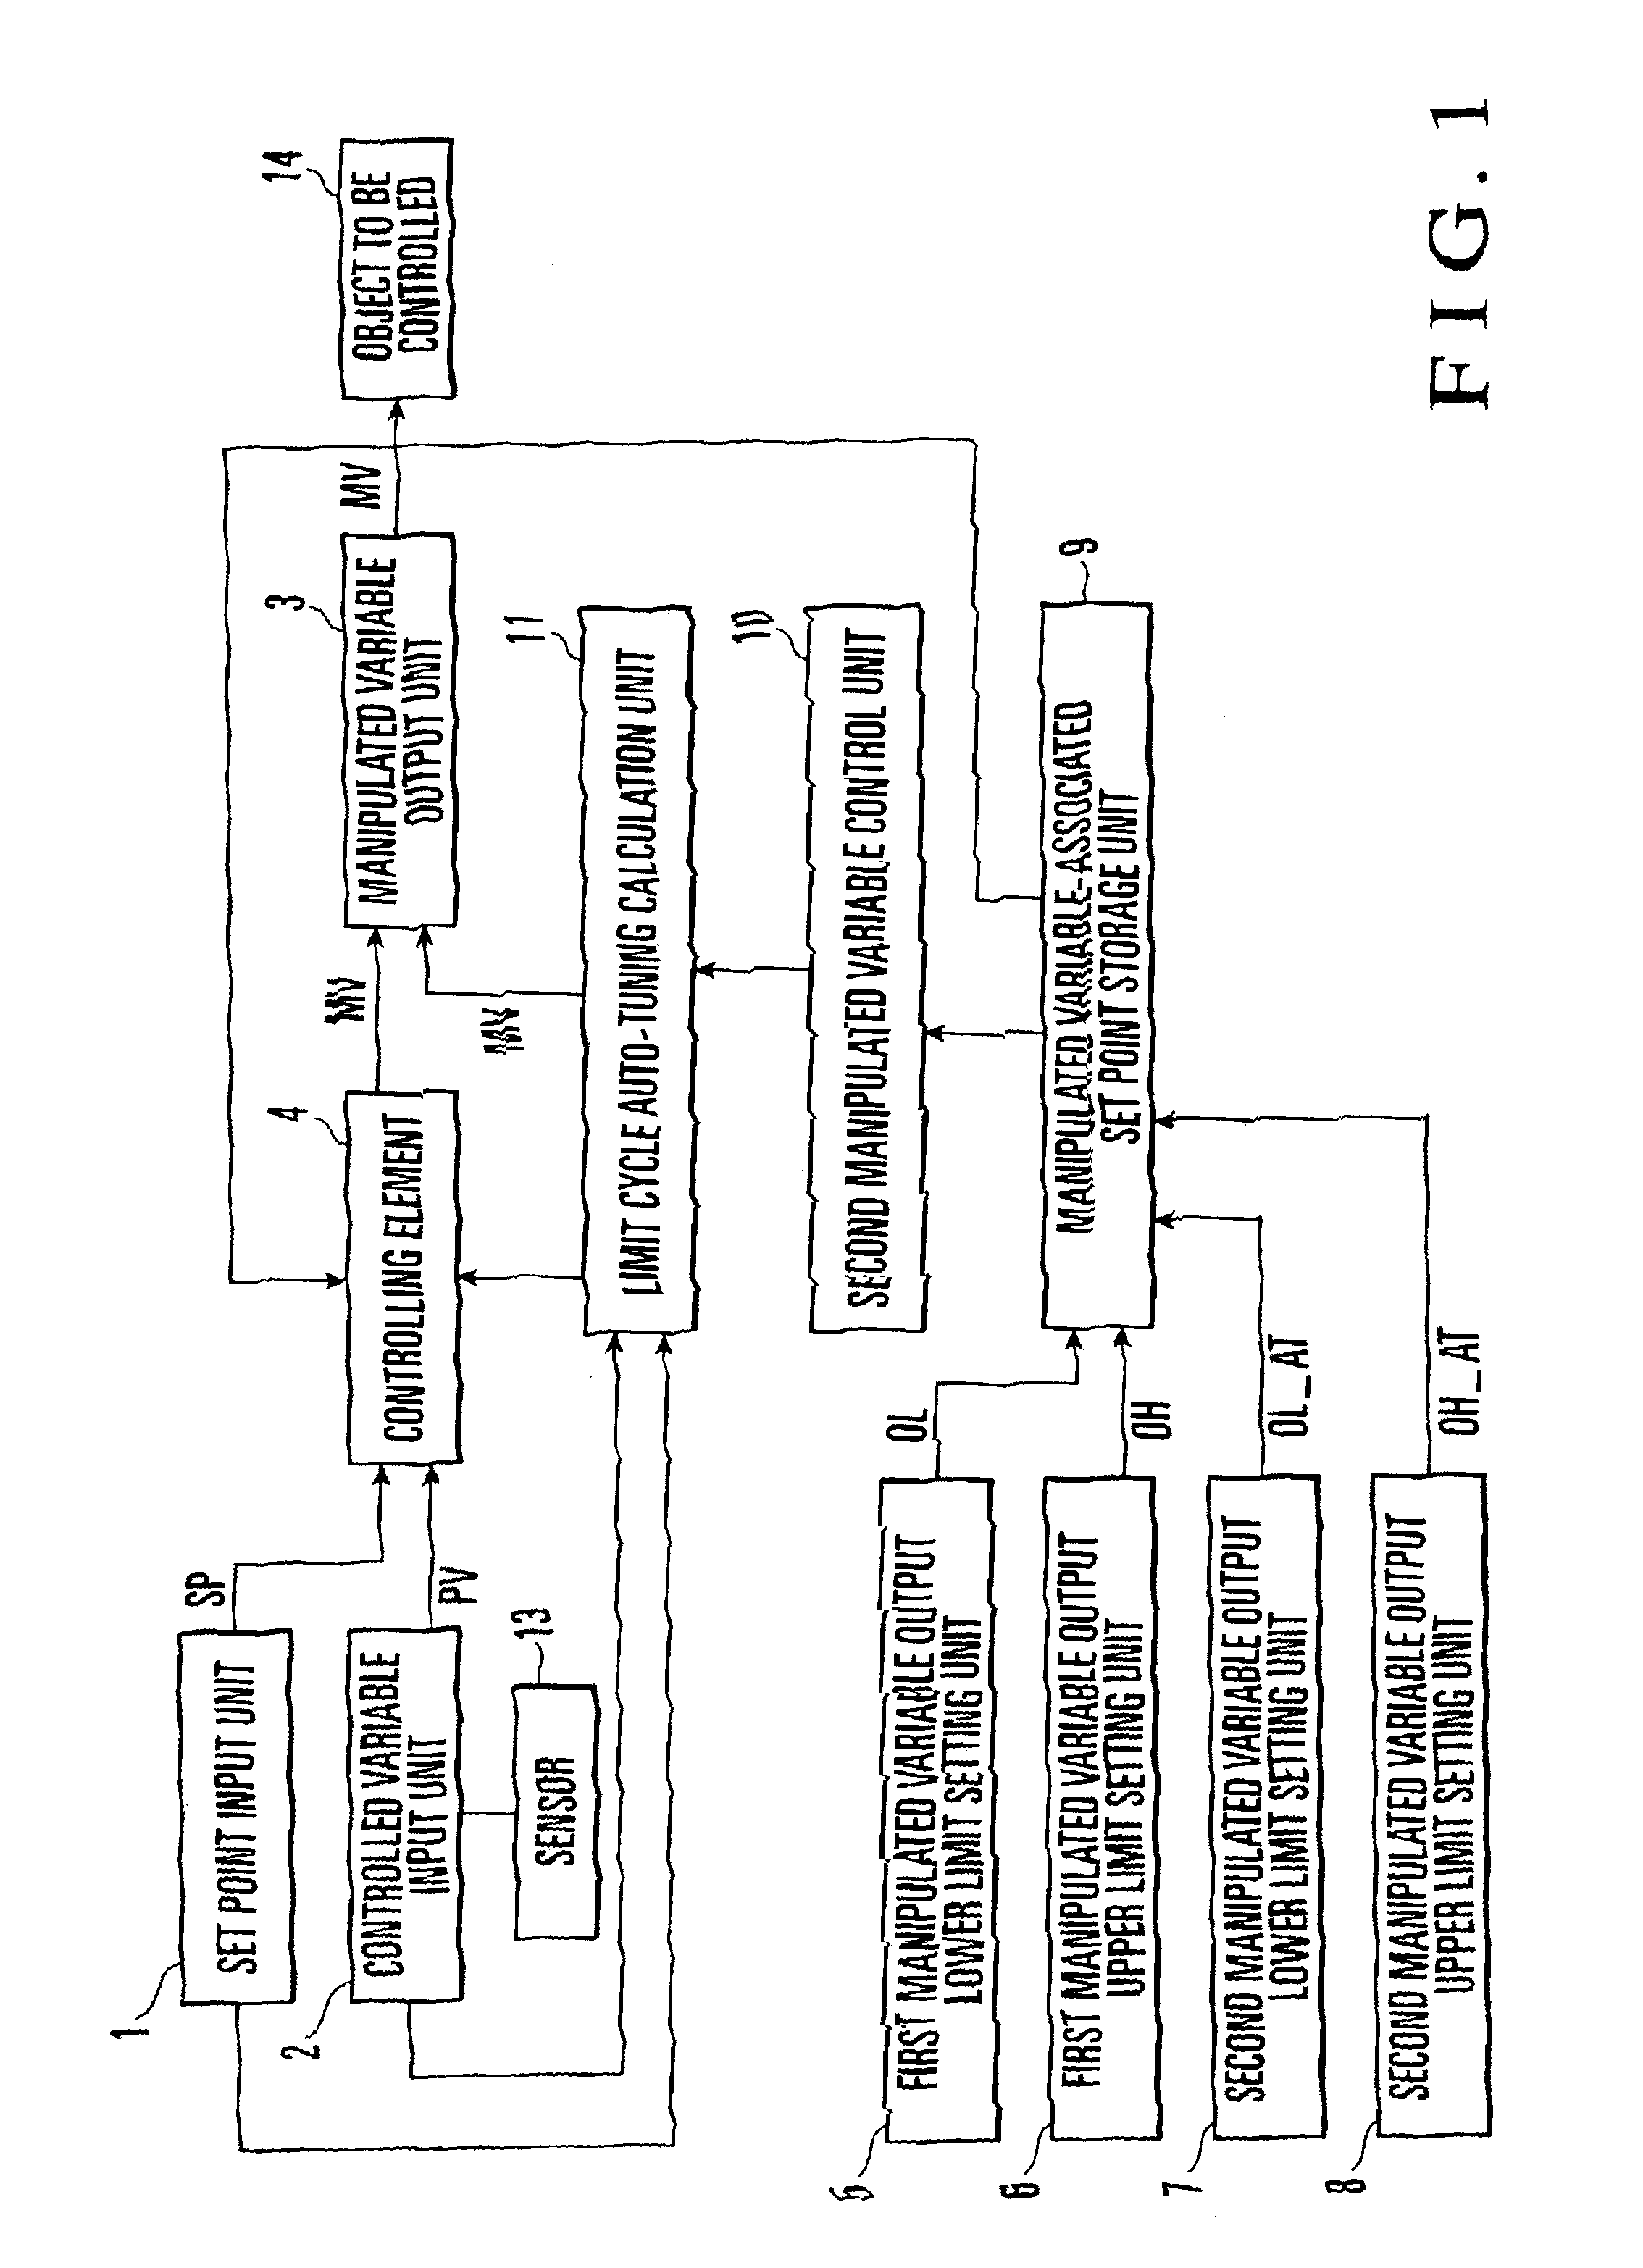 Control apparatus having a limit cycle auto-tuning function